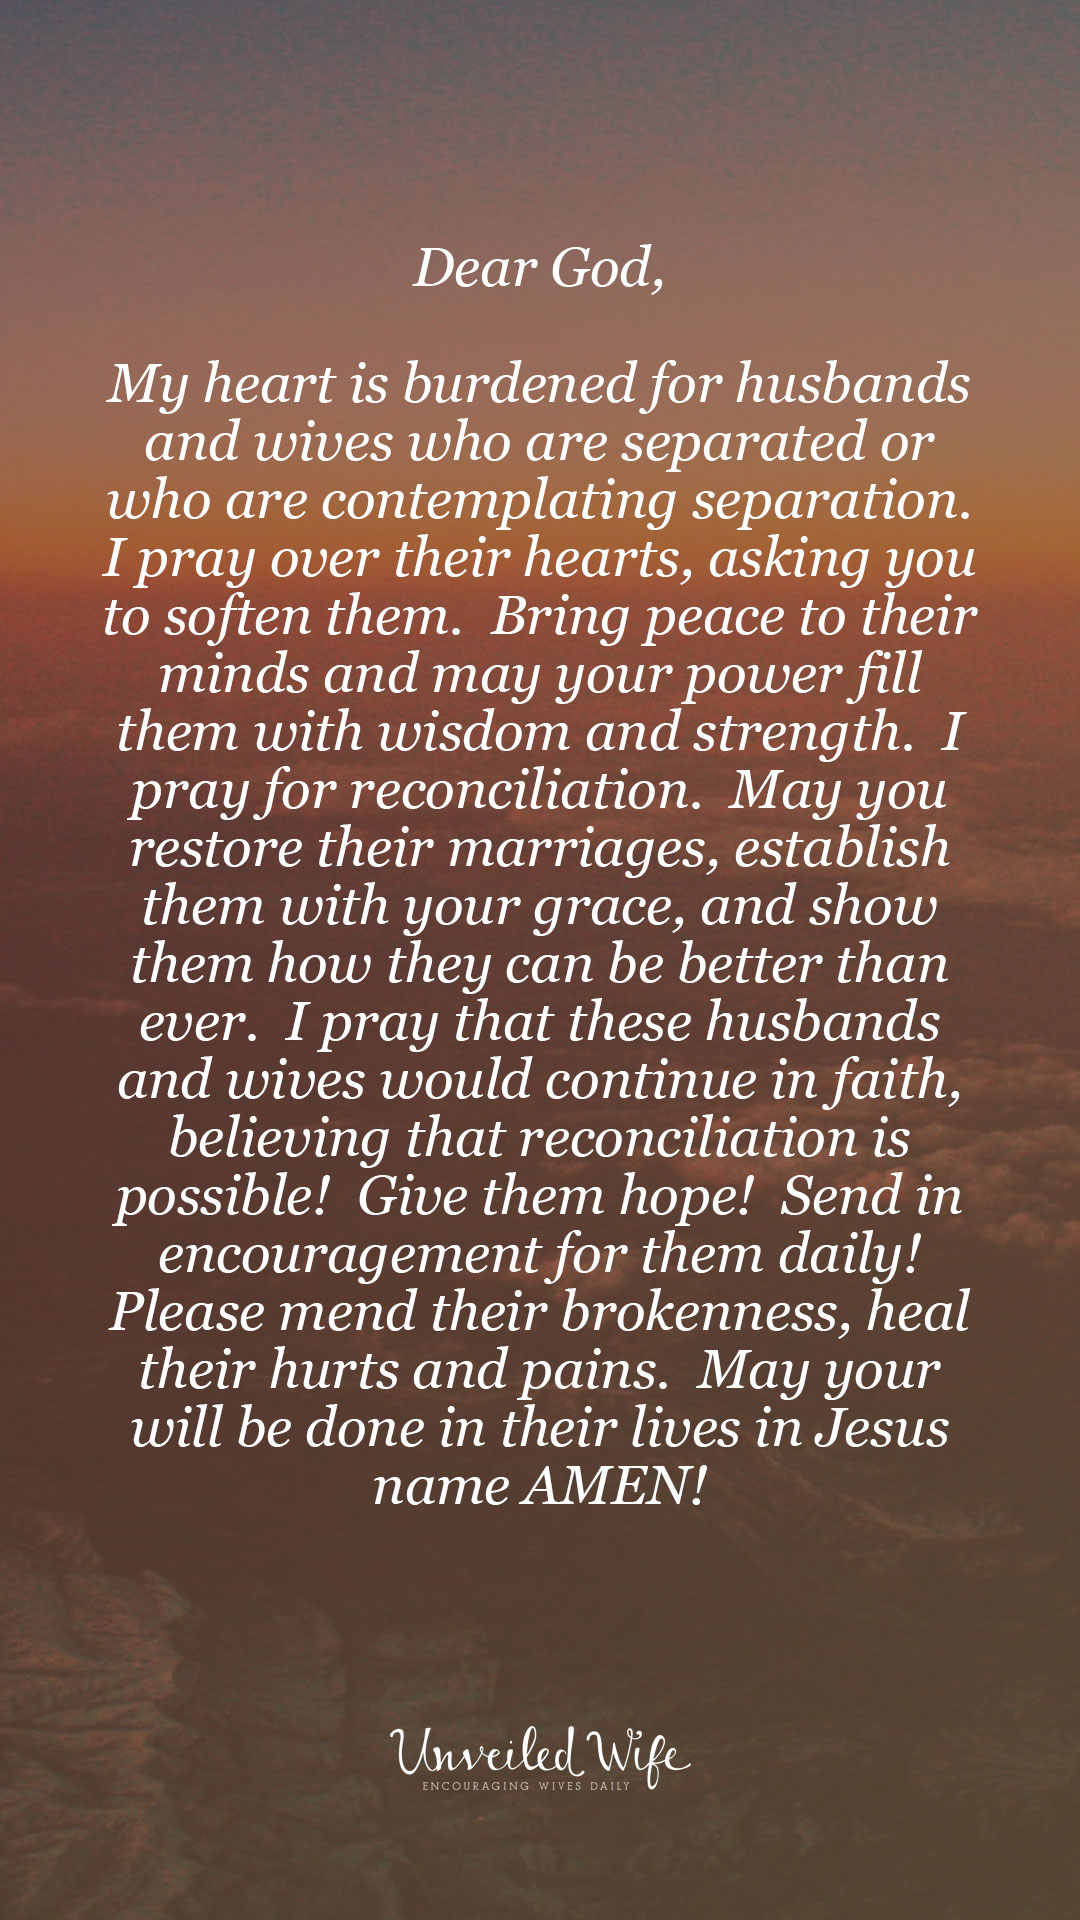 Prayer Of The Day - Reconciliation For Marriages That Are Separated